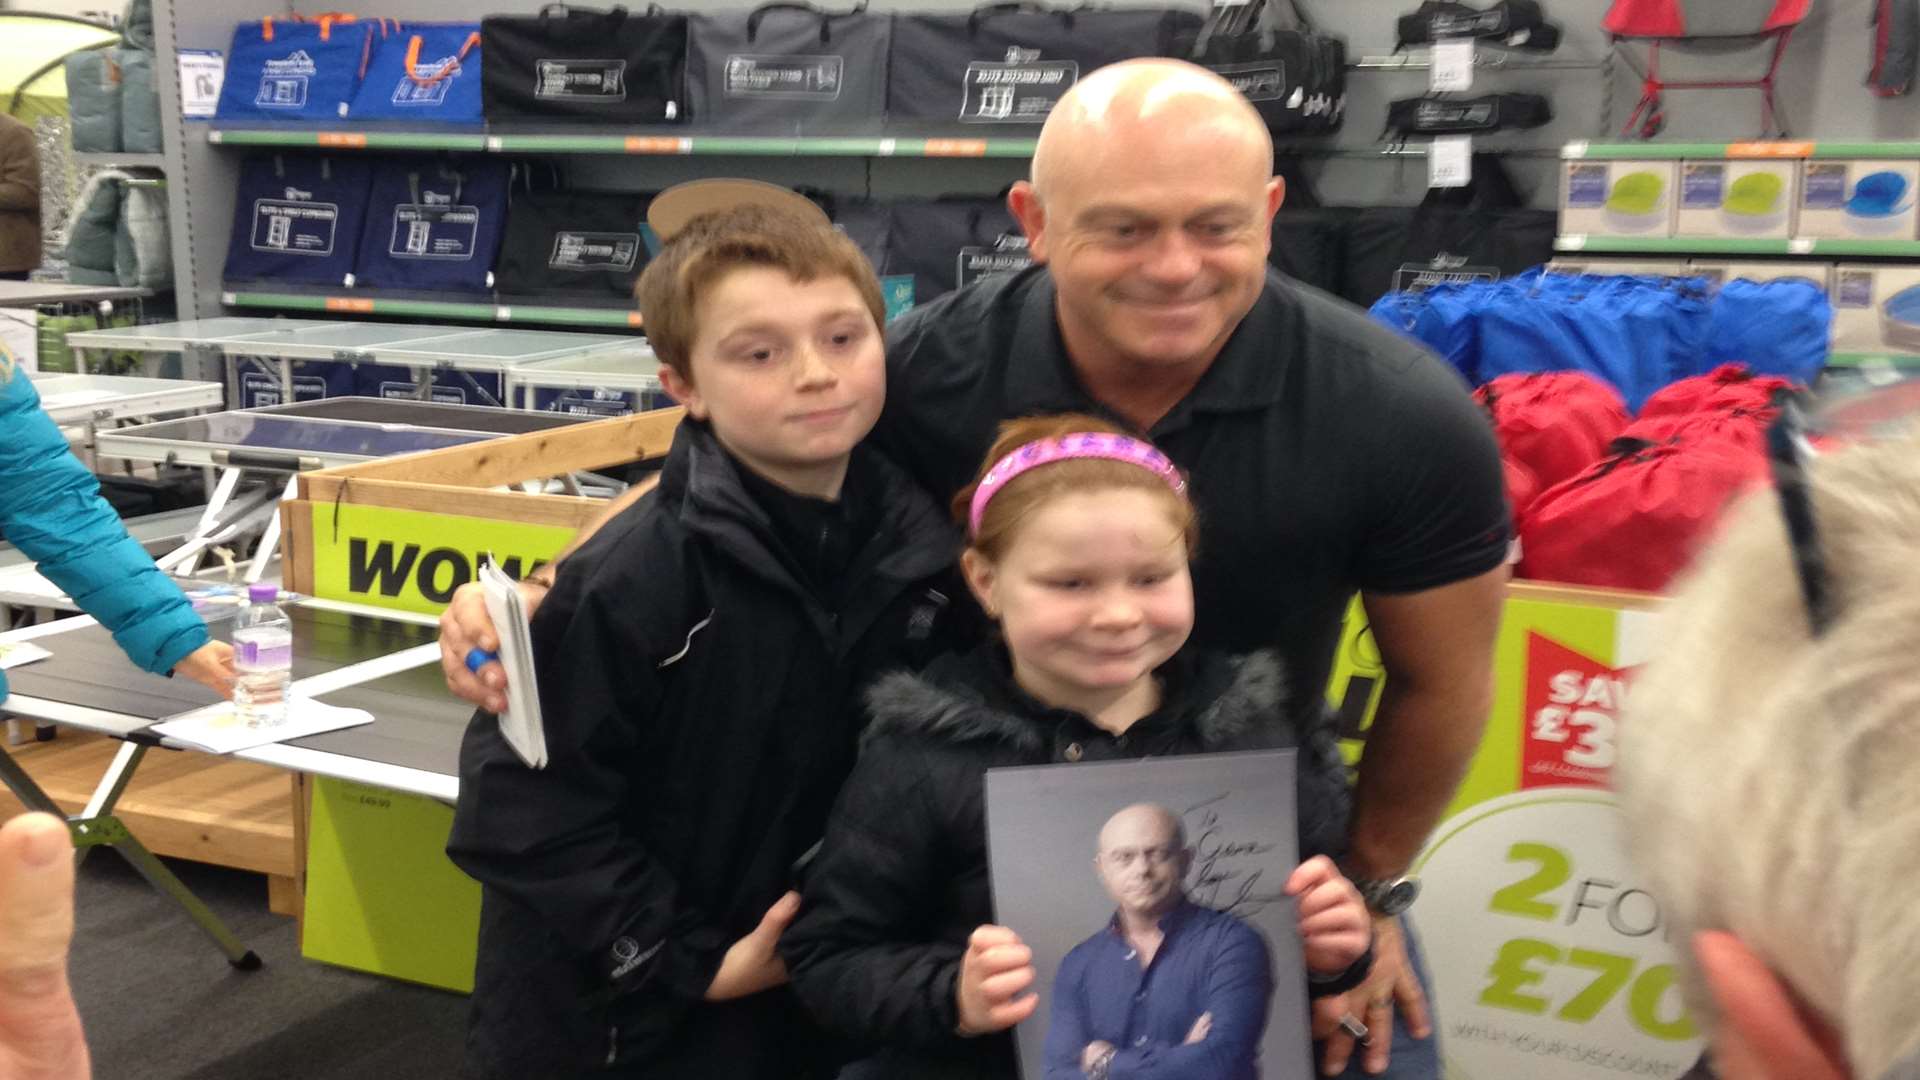 Ross meeting youngsters at the store